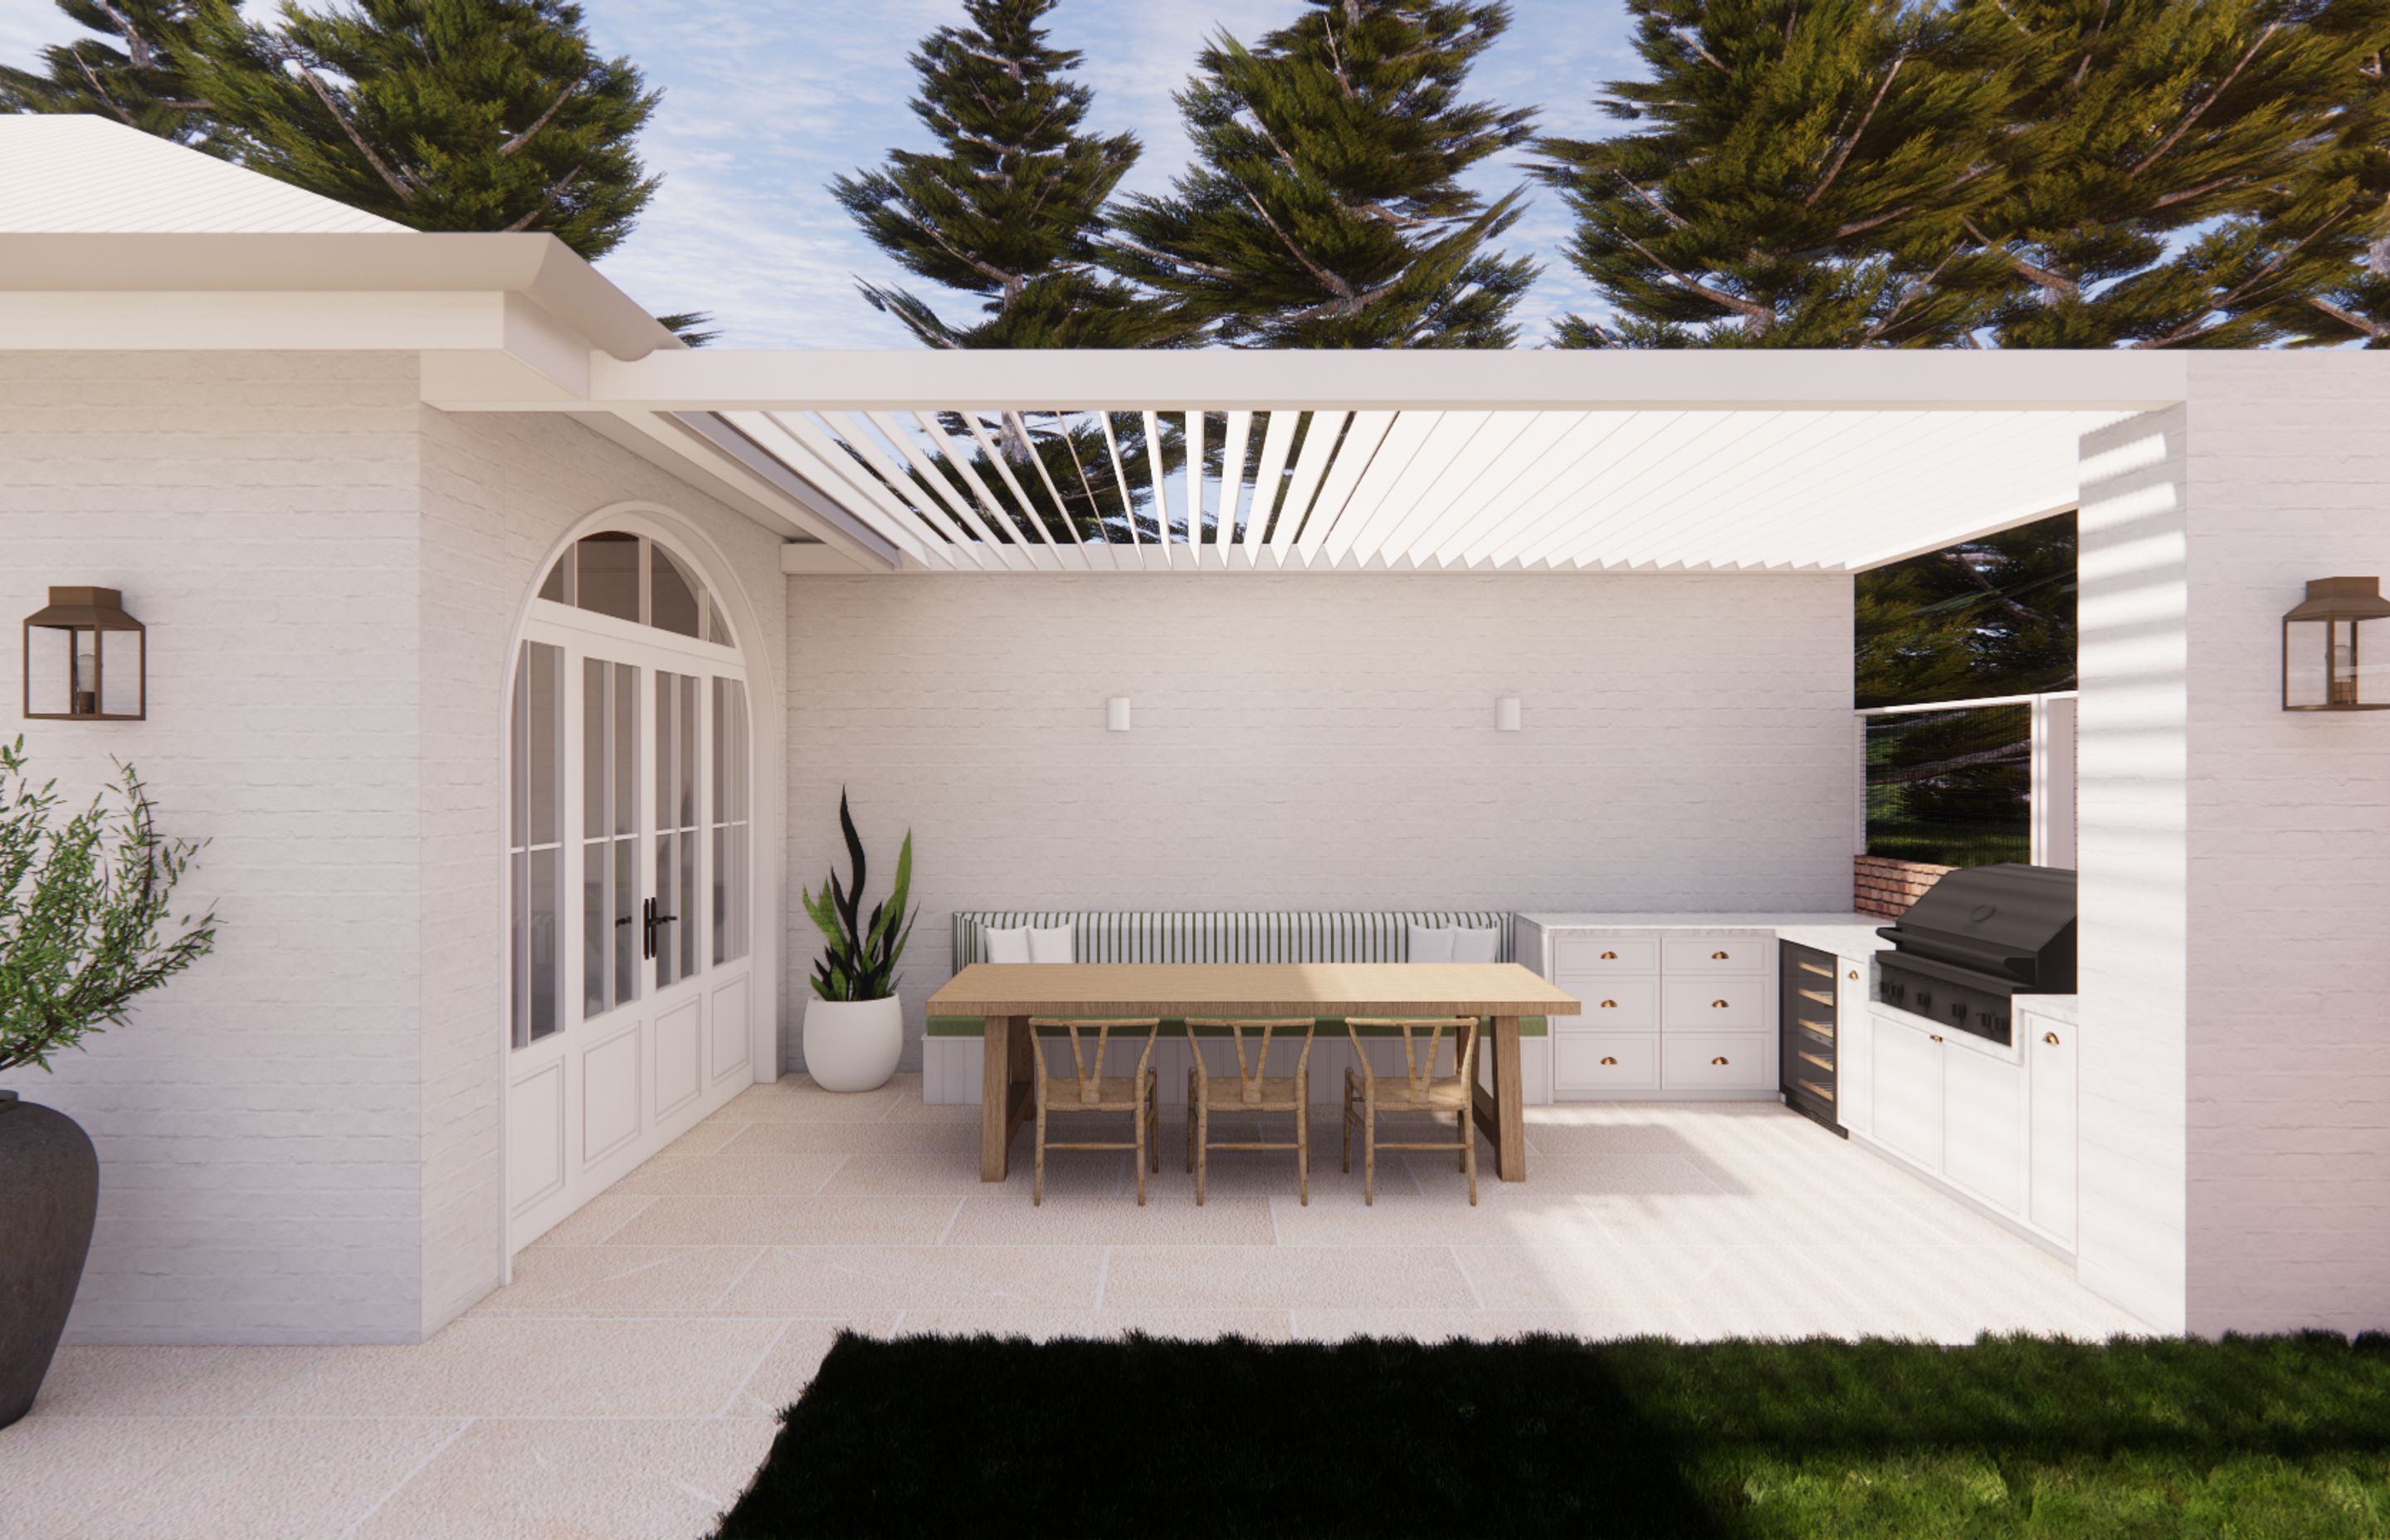 Copy-of-POOL-HOUSE-VIEW-5.png